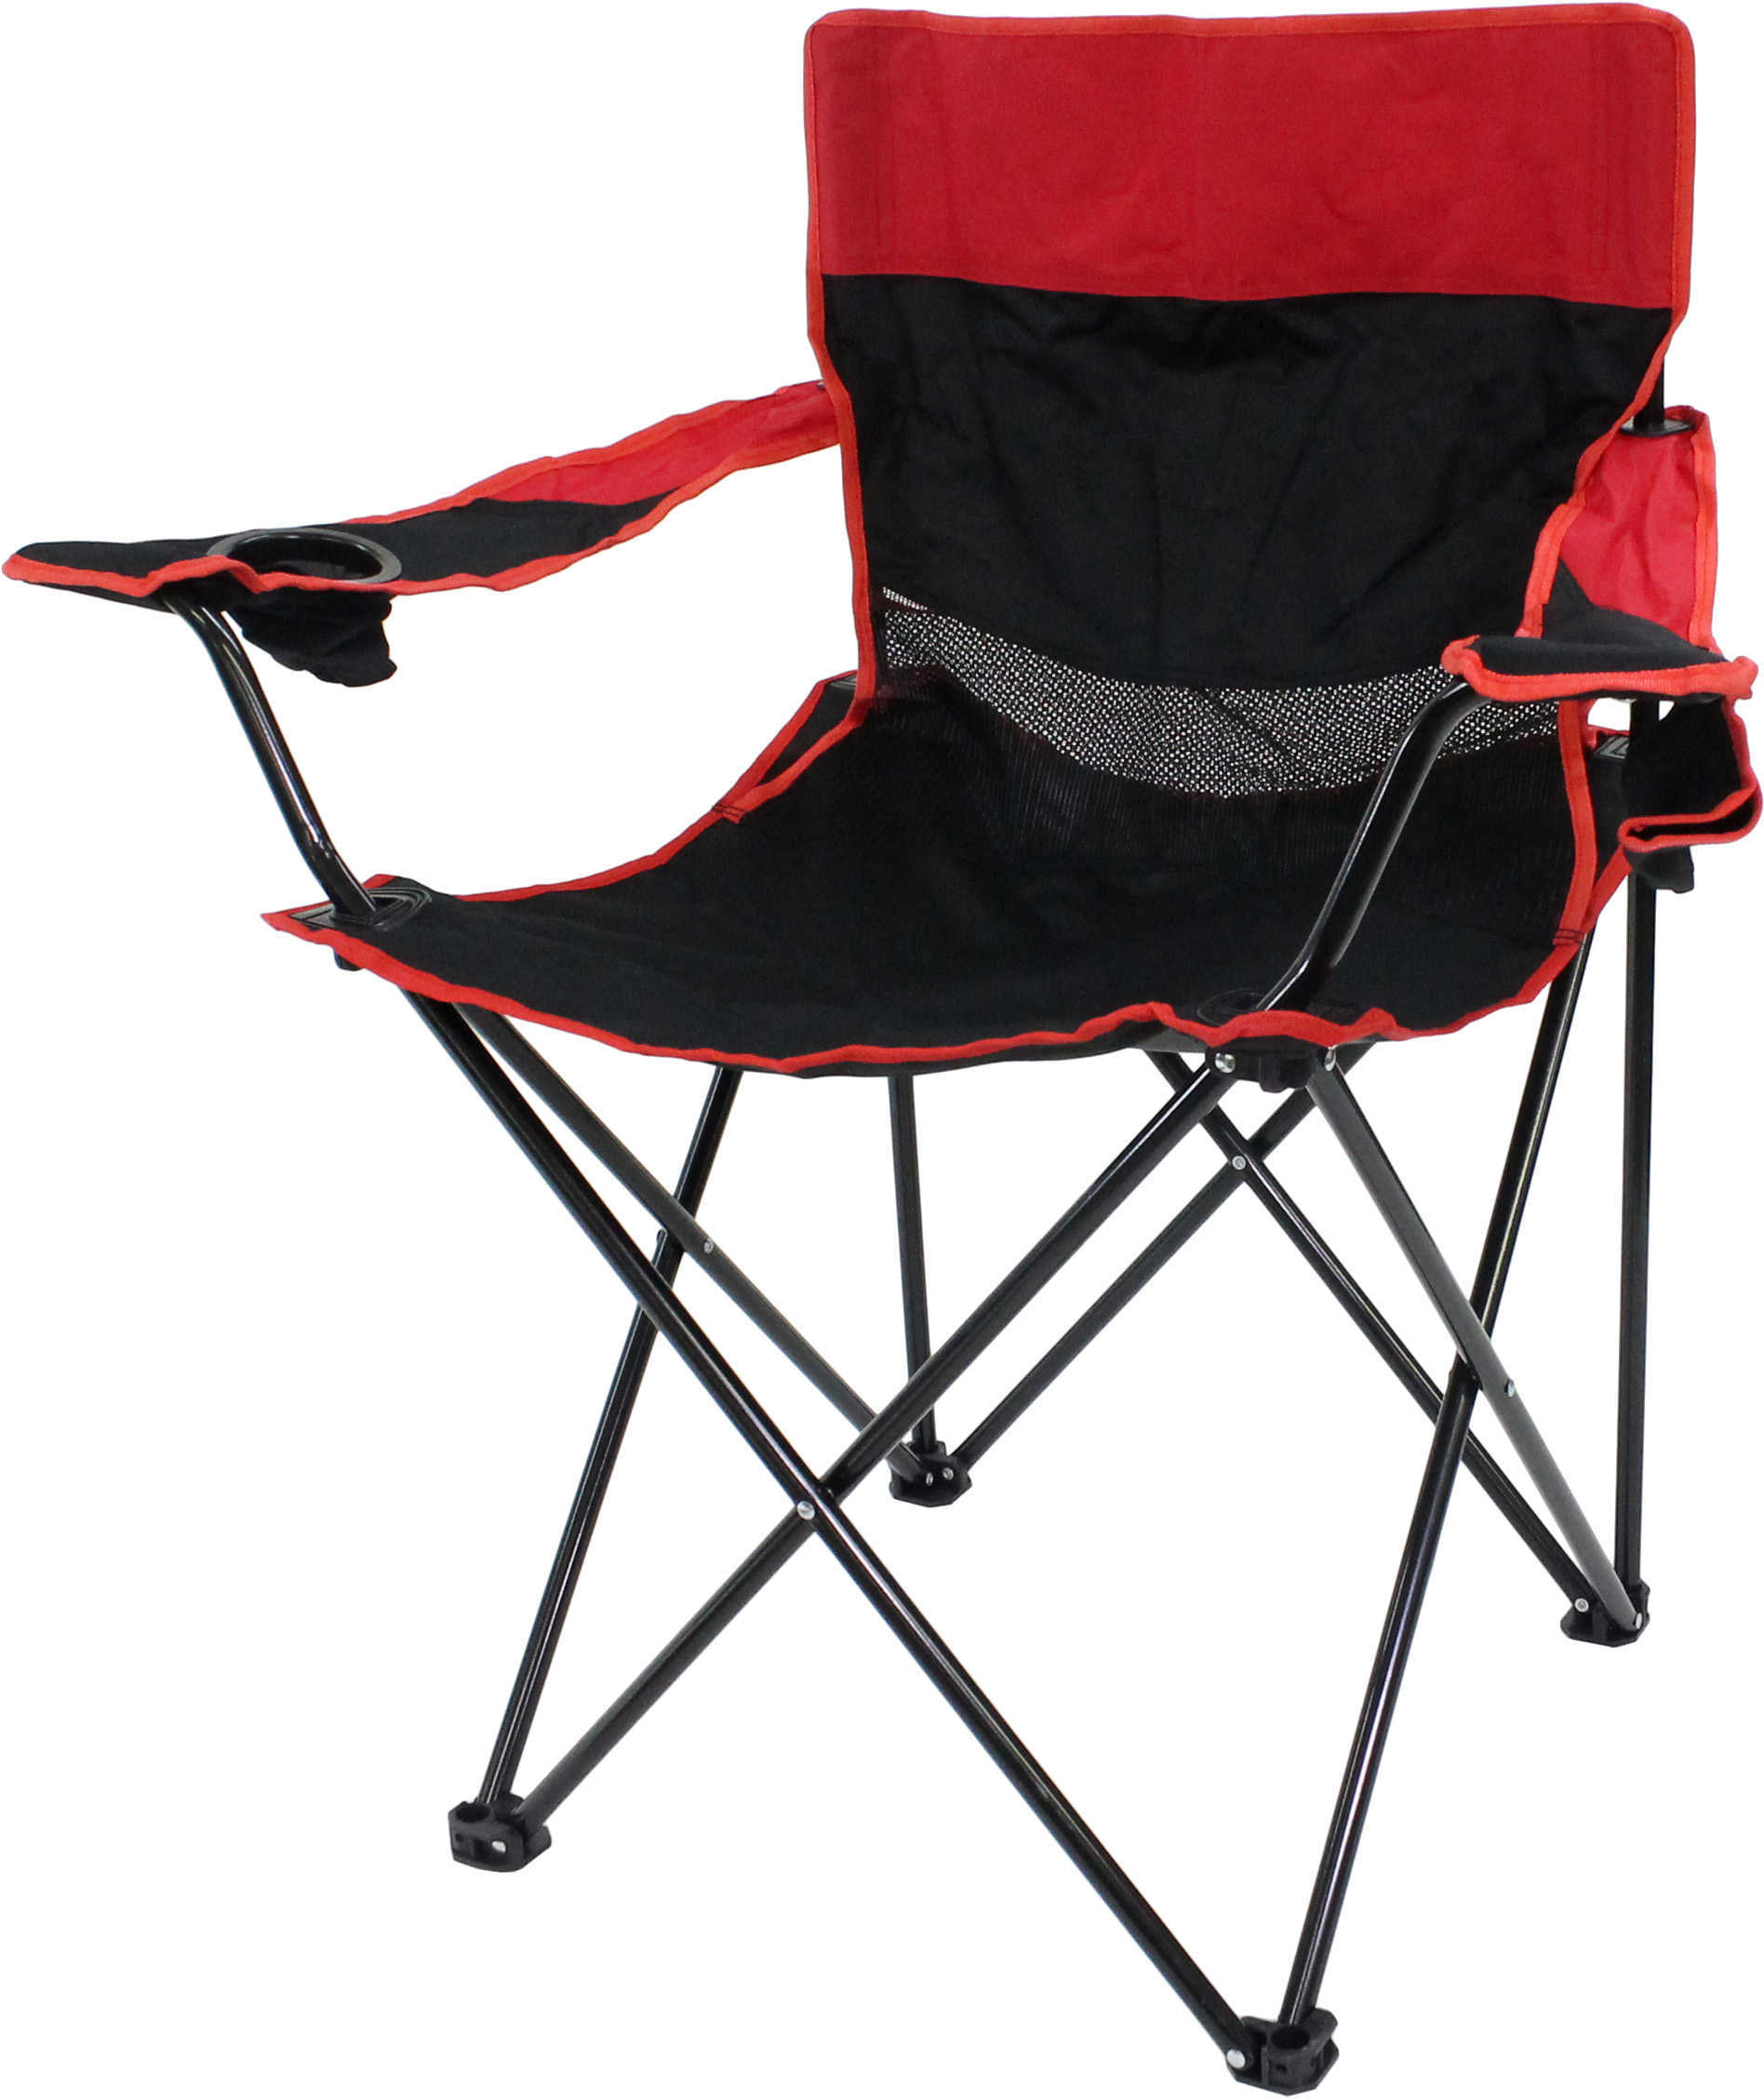 Tex Sport Oversized Arm Chair Md: 15150